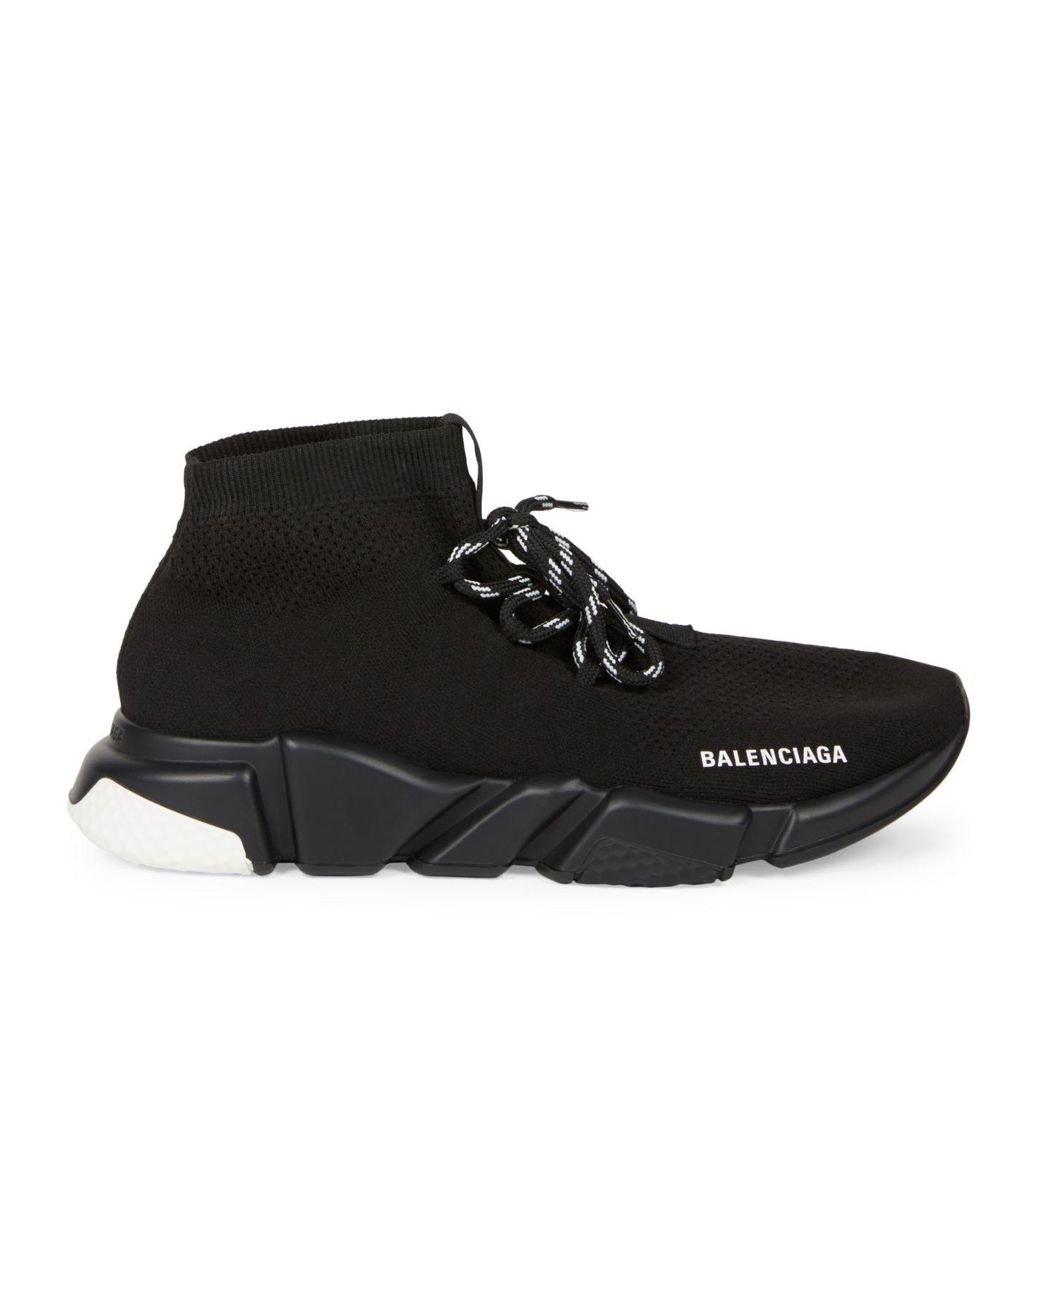 Balenciaga Synthetic Speed Lace-up Sock Sneakers in Black/White (Black ...